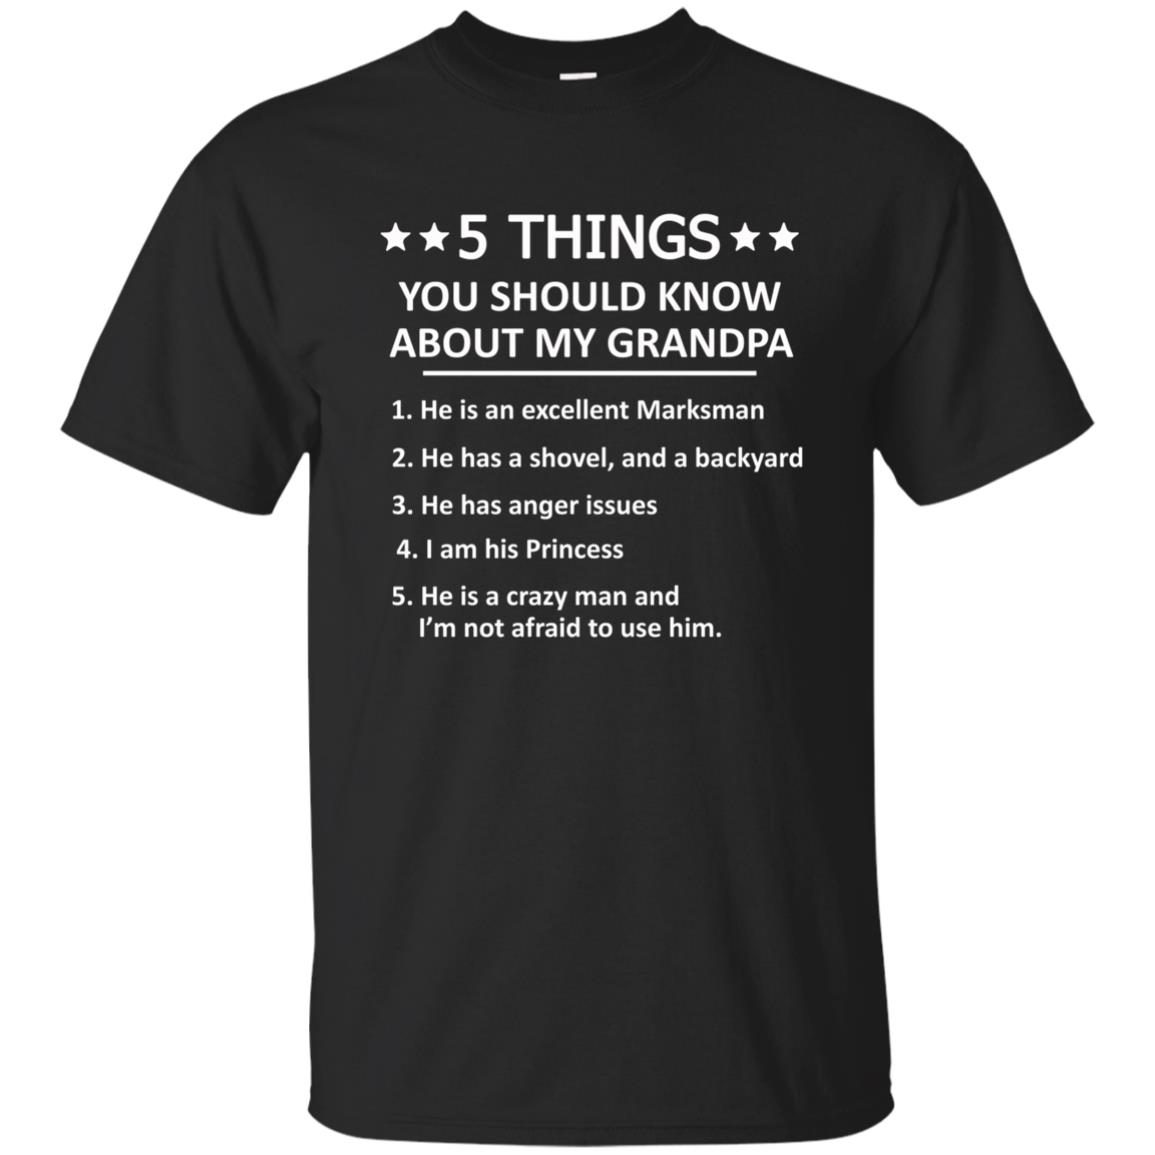 5 Things you should know about my grandpa t-shirt, hoodies, tank top